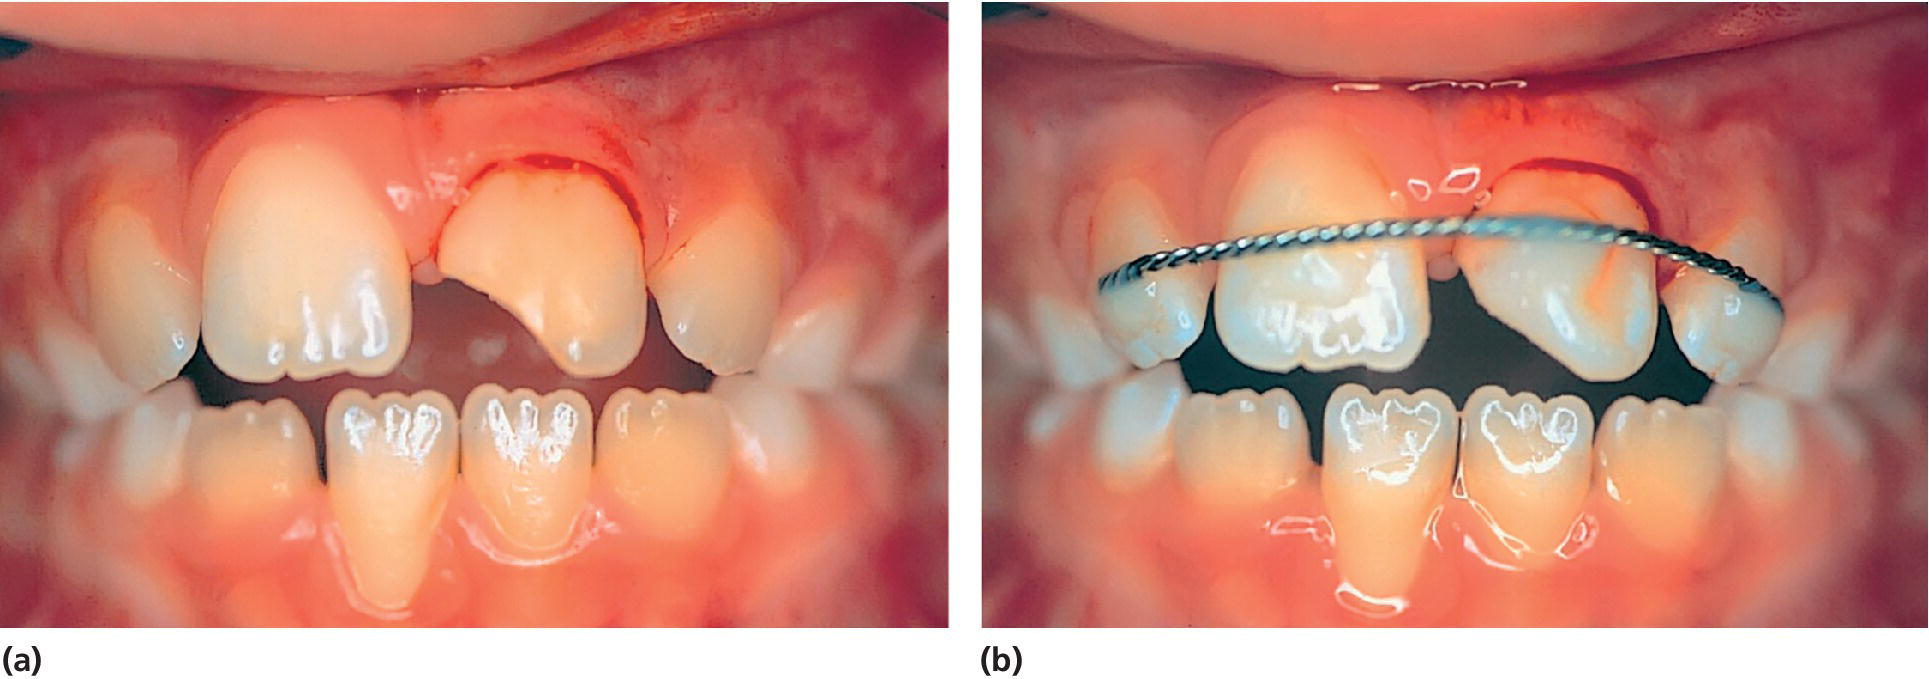 Photos displaying both subluxation and uncomplicated crown fracture in the left central incisor (left) and tooth stabilized with a splint and applied temporary crown restoration (right).